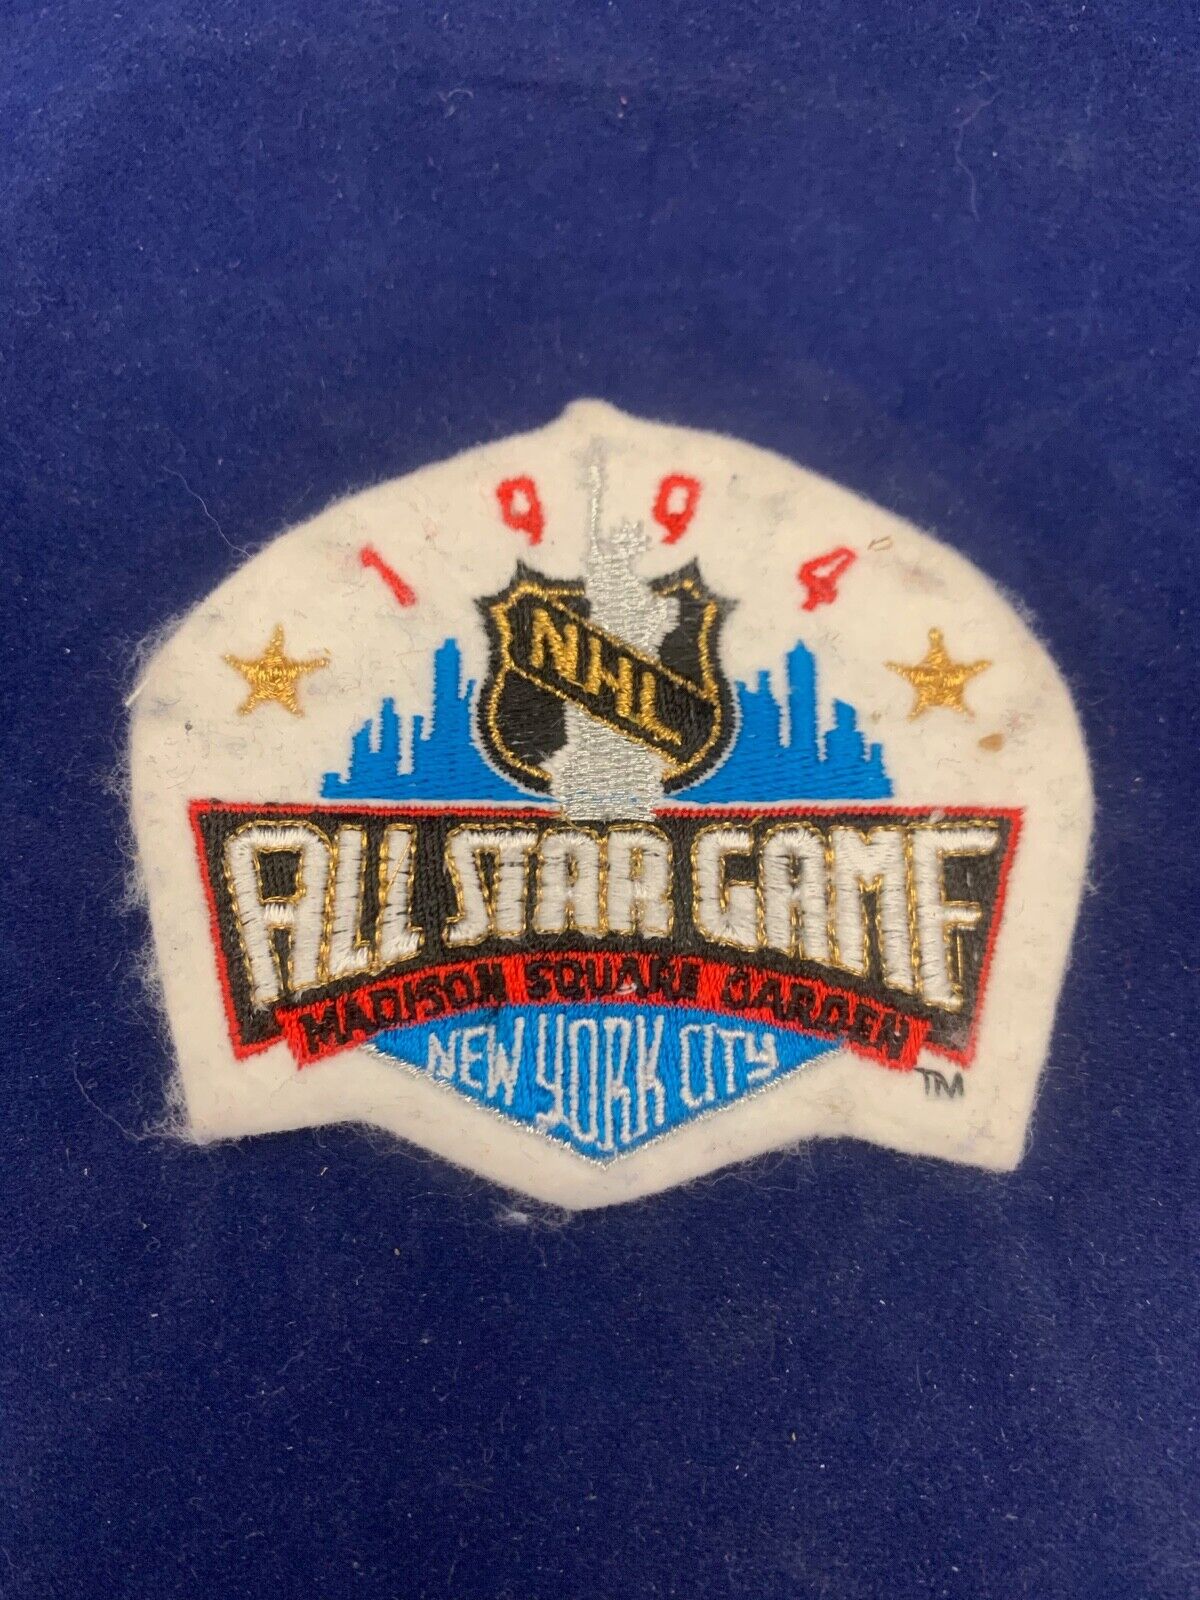 1994 NHL All Star Game Madison Square Garden New York Patch Size 3 x 3.5 inches